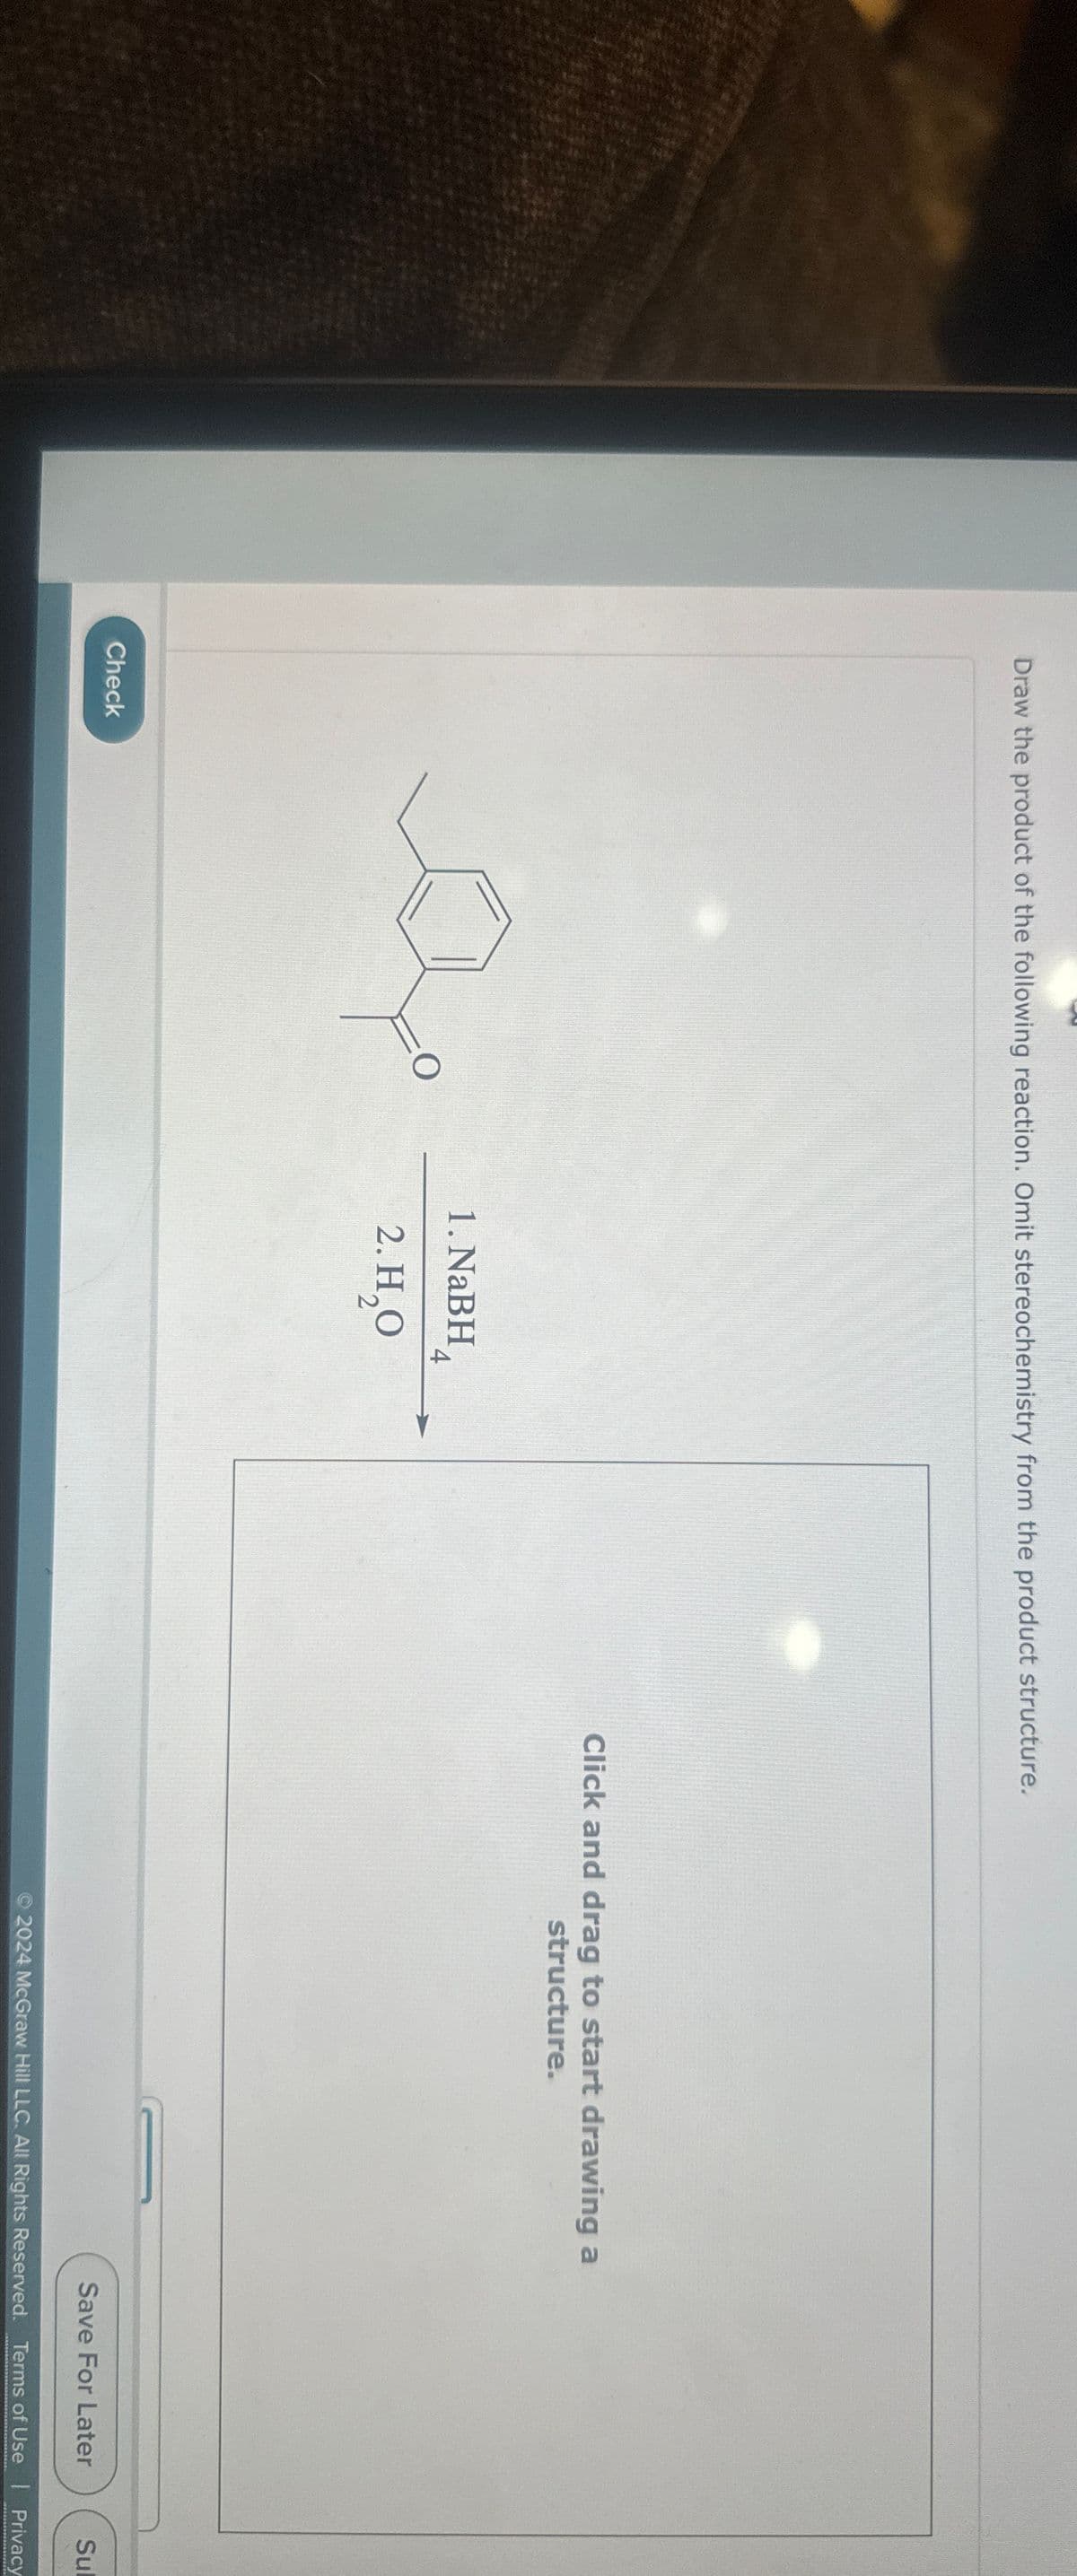 Draw the product of the following reaction. Omit stereochemistry from the product structure.
Check
O
1. NaBH 4
2. H₂O
Click and drag to start drawing a
structure.
Save For Later
Sul
2024 McGraw Hill LLC. All Rights Reserved. Terms of Use | Privacy